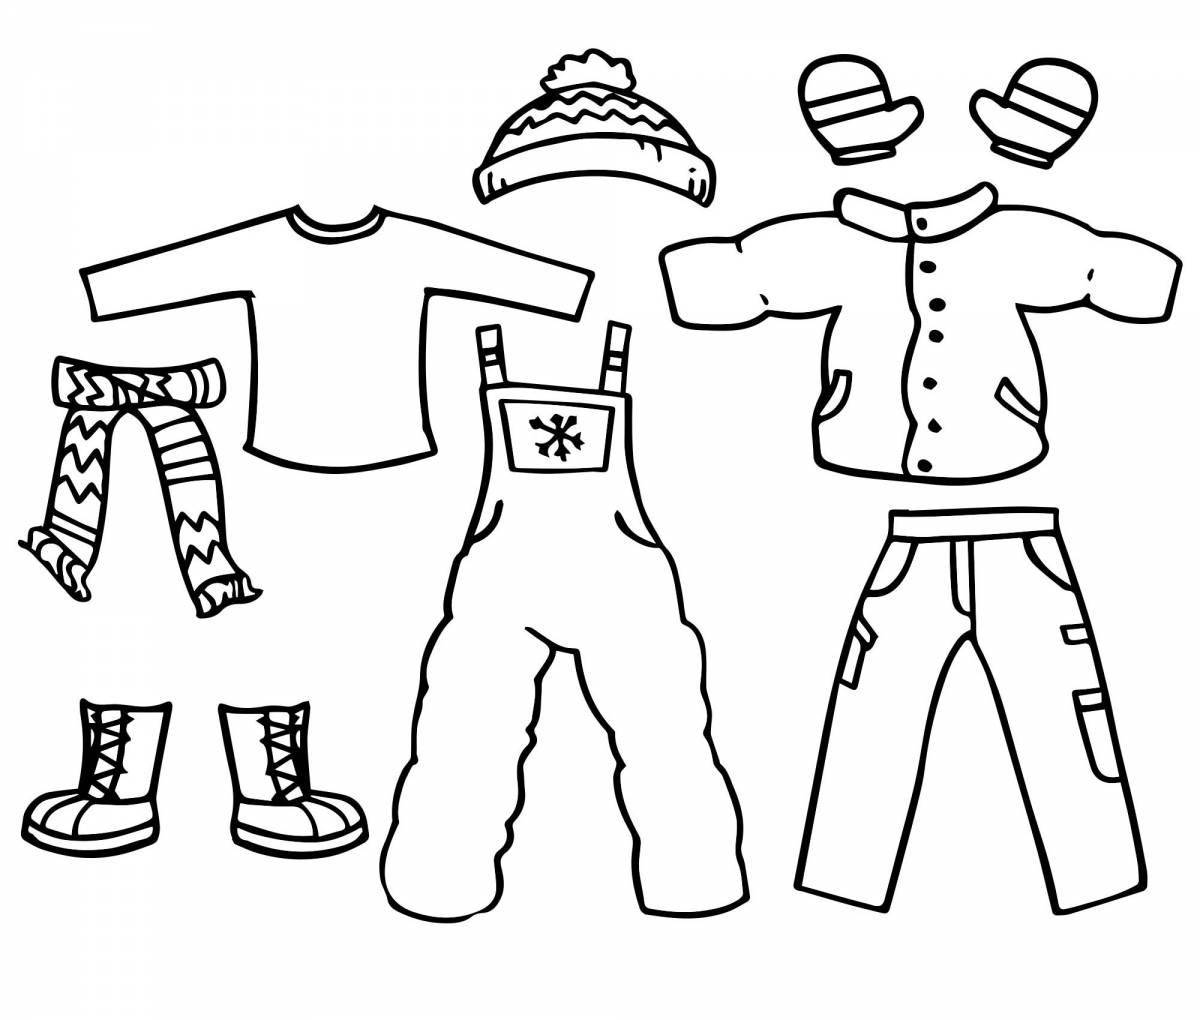 Coloured winter clothes for preschoolers coloring page